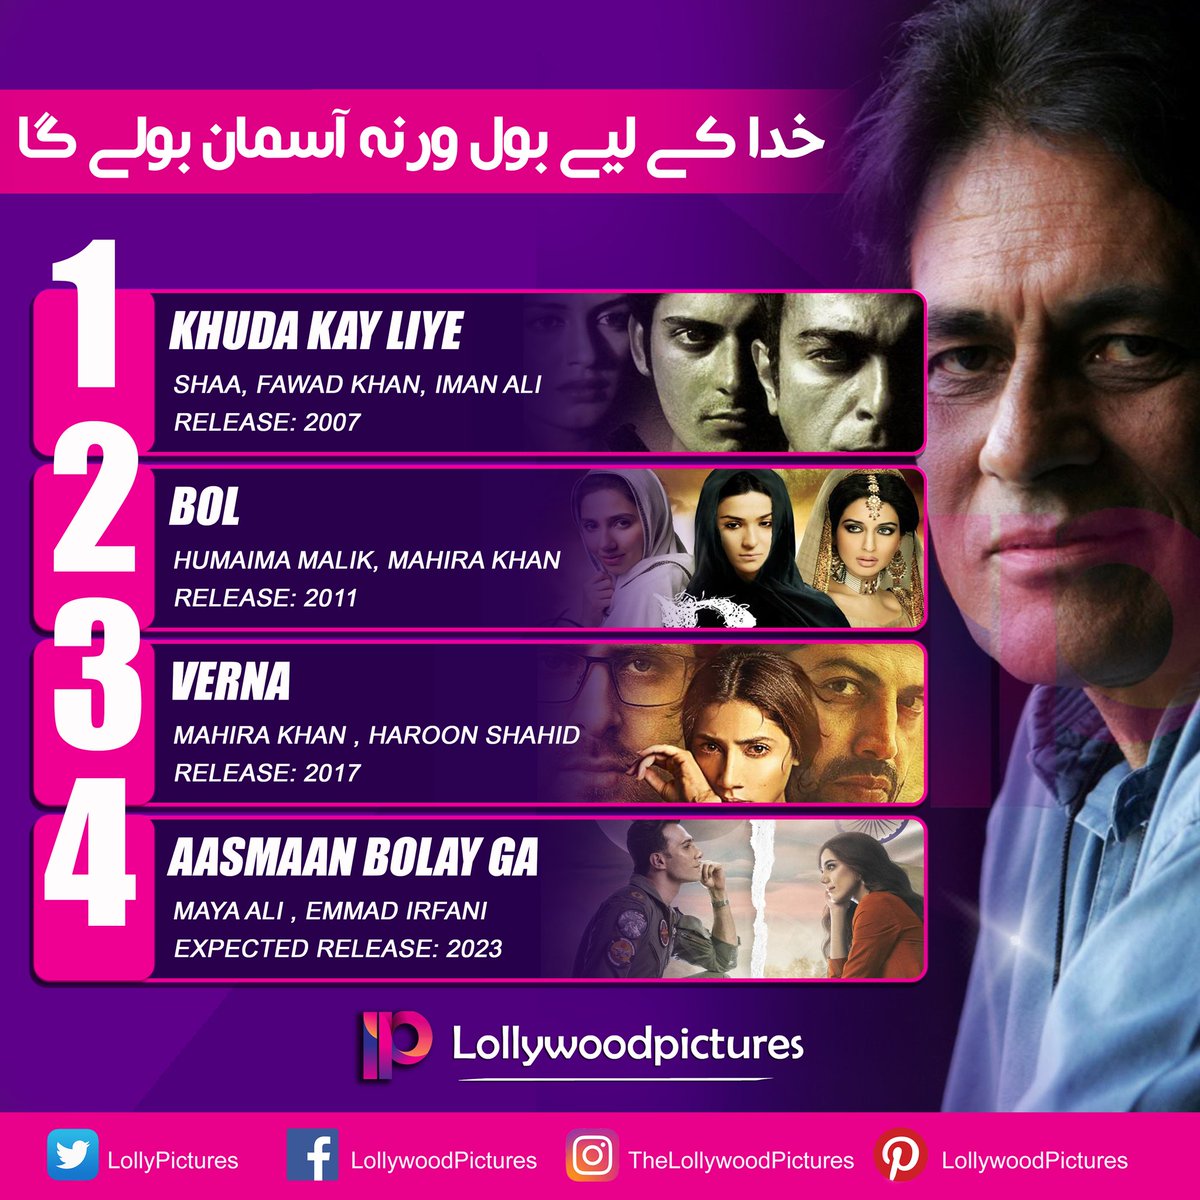 'Khuda Kay Liye Bol Verna Aasman Bolay Ga'.

Veteran Director Shoaib Mansoor's ambitious film journey looks to focus on an iconic line which is all set to complete with his upcoming release #AasmaanBolayGa. 

Have you watched his last 3 directed movie? 

#Verna #KhudaKayLiye #Bol